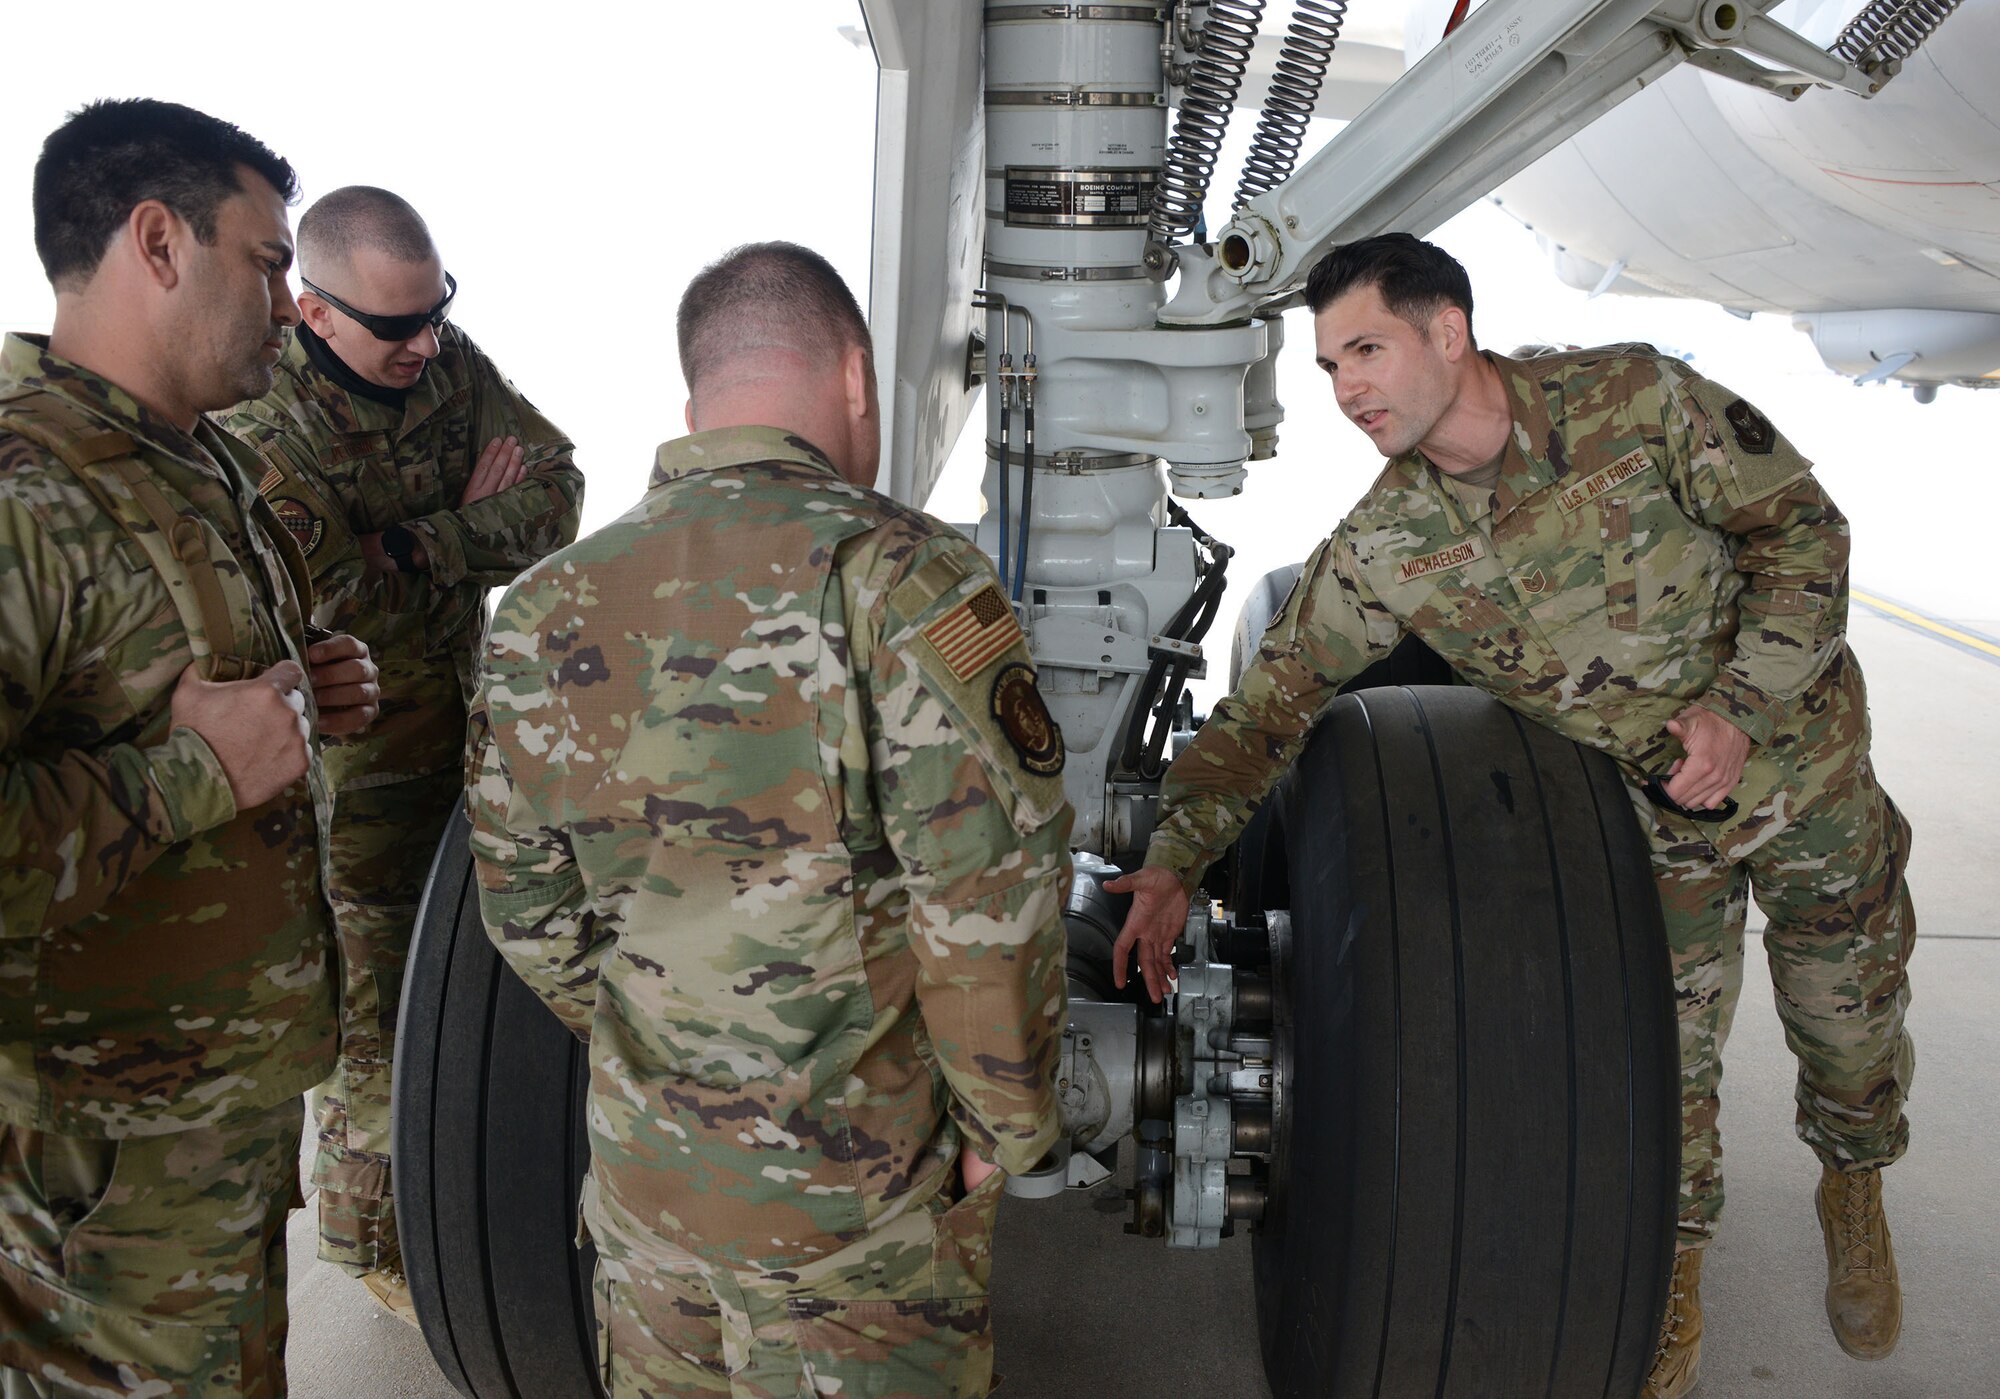 Tech. Sgt. Ian Michaelson, 931st Aircraft Maintenance Squadron, crew chief, gives recruiters from the 352nd Recruiting Squadron a tour of the KC-46 Pegasus during a recruiting event at McConnell Air Force Base, Kansas, Apr. 10, 2021.